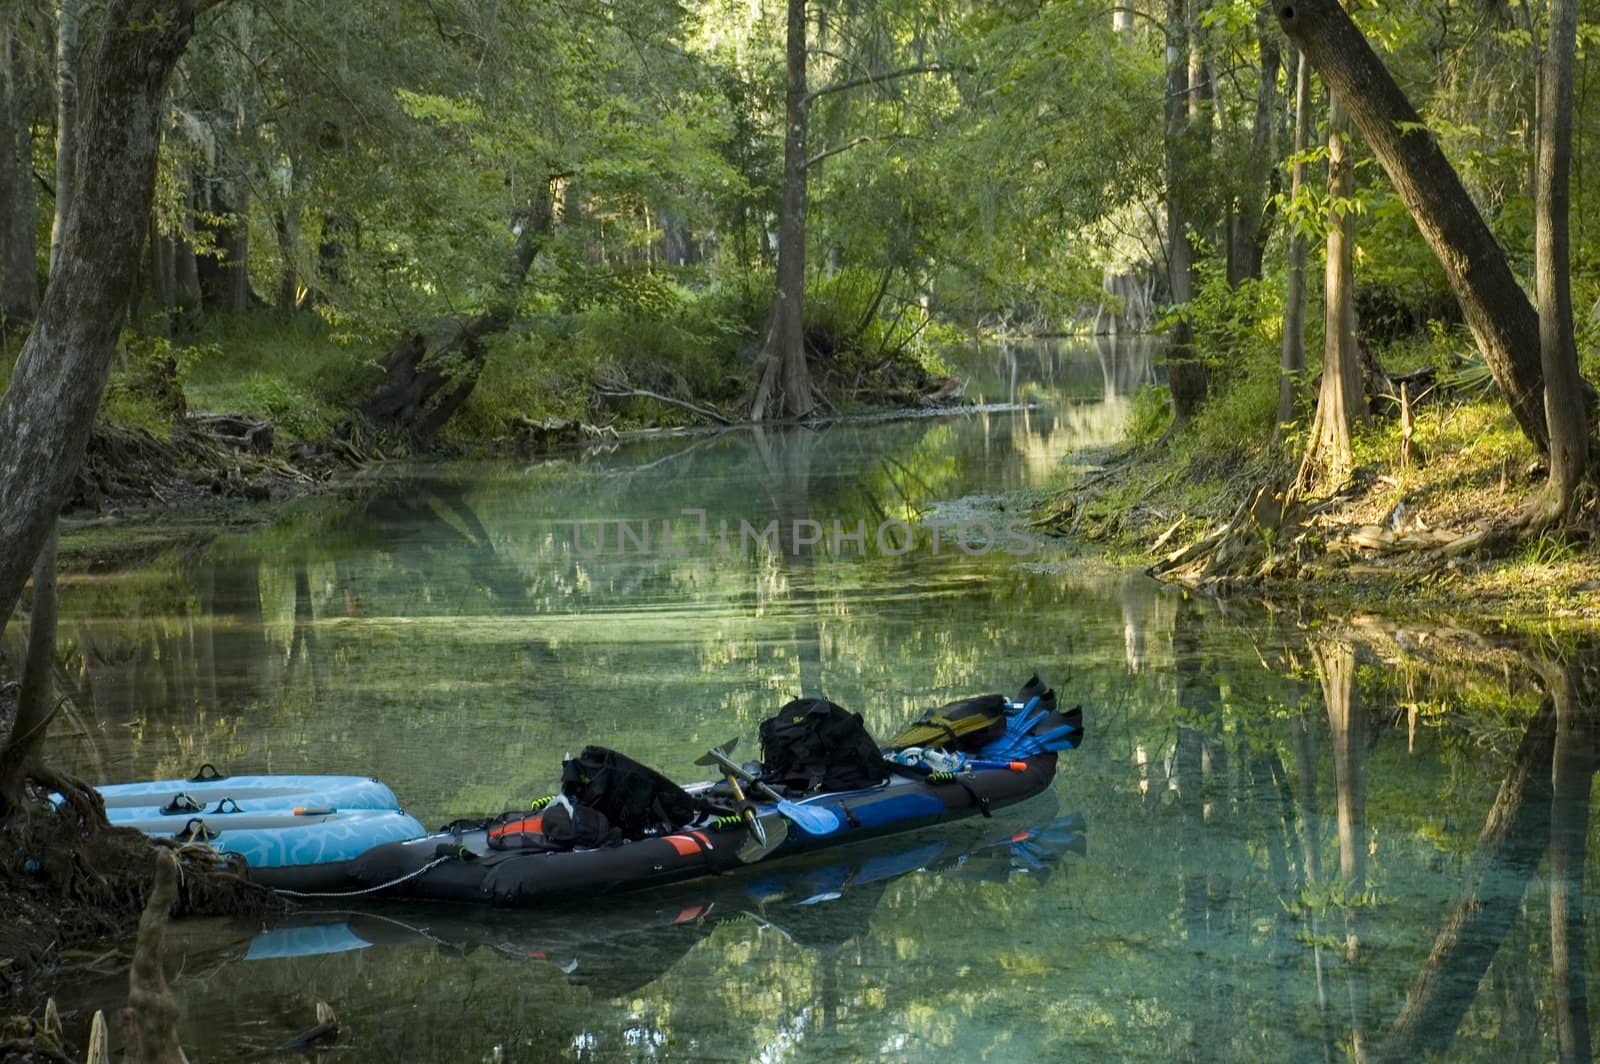 A kayak awaits its paddler in the spring.